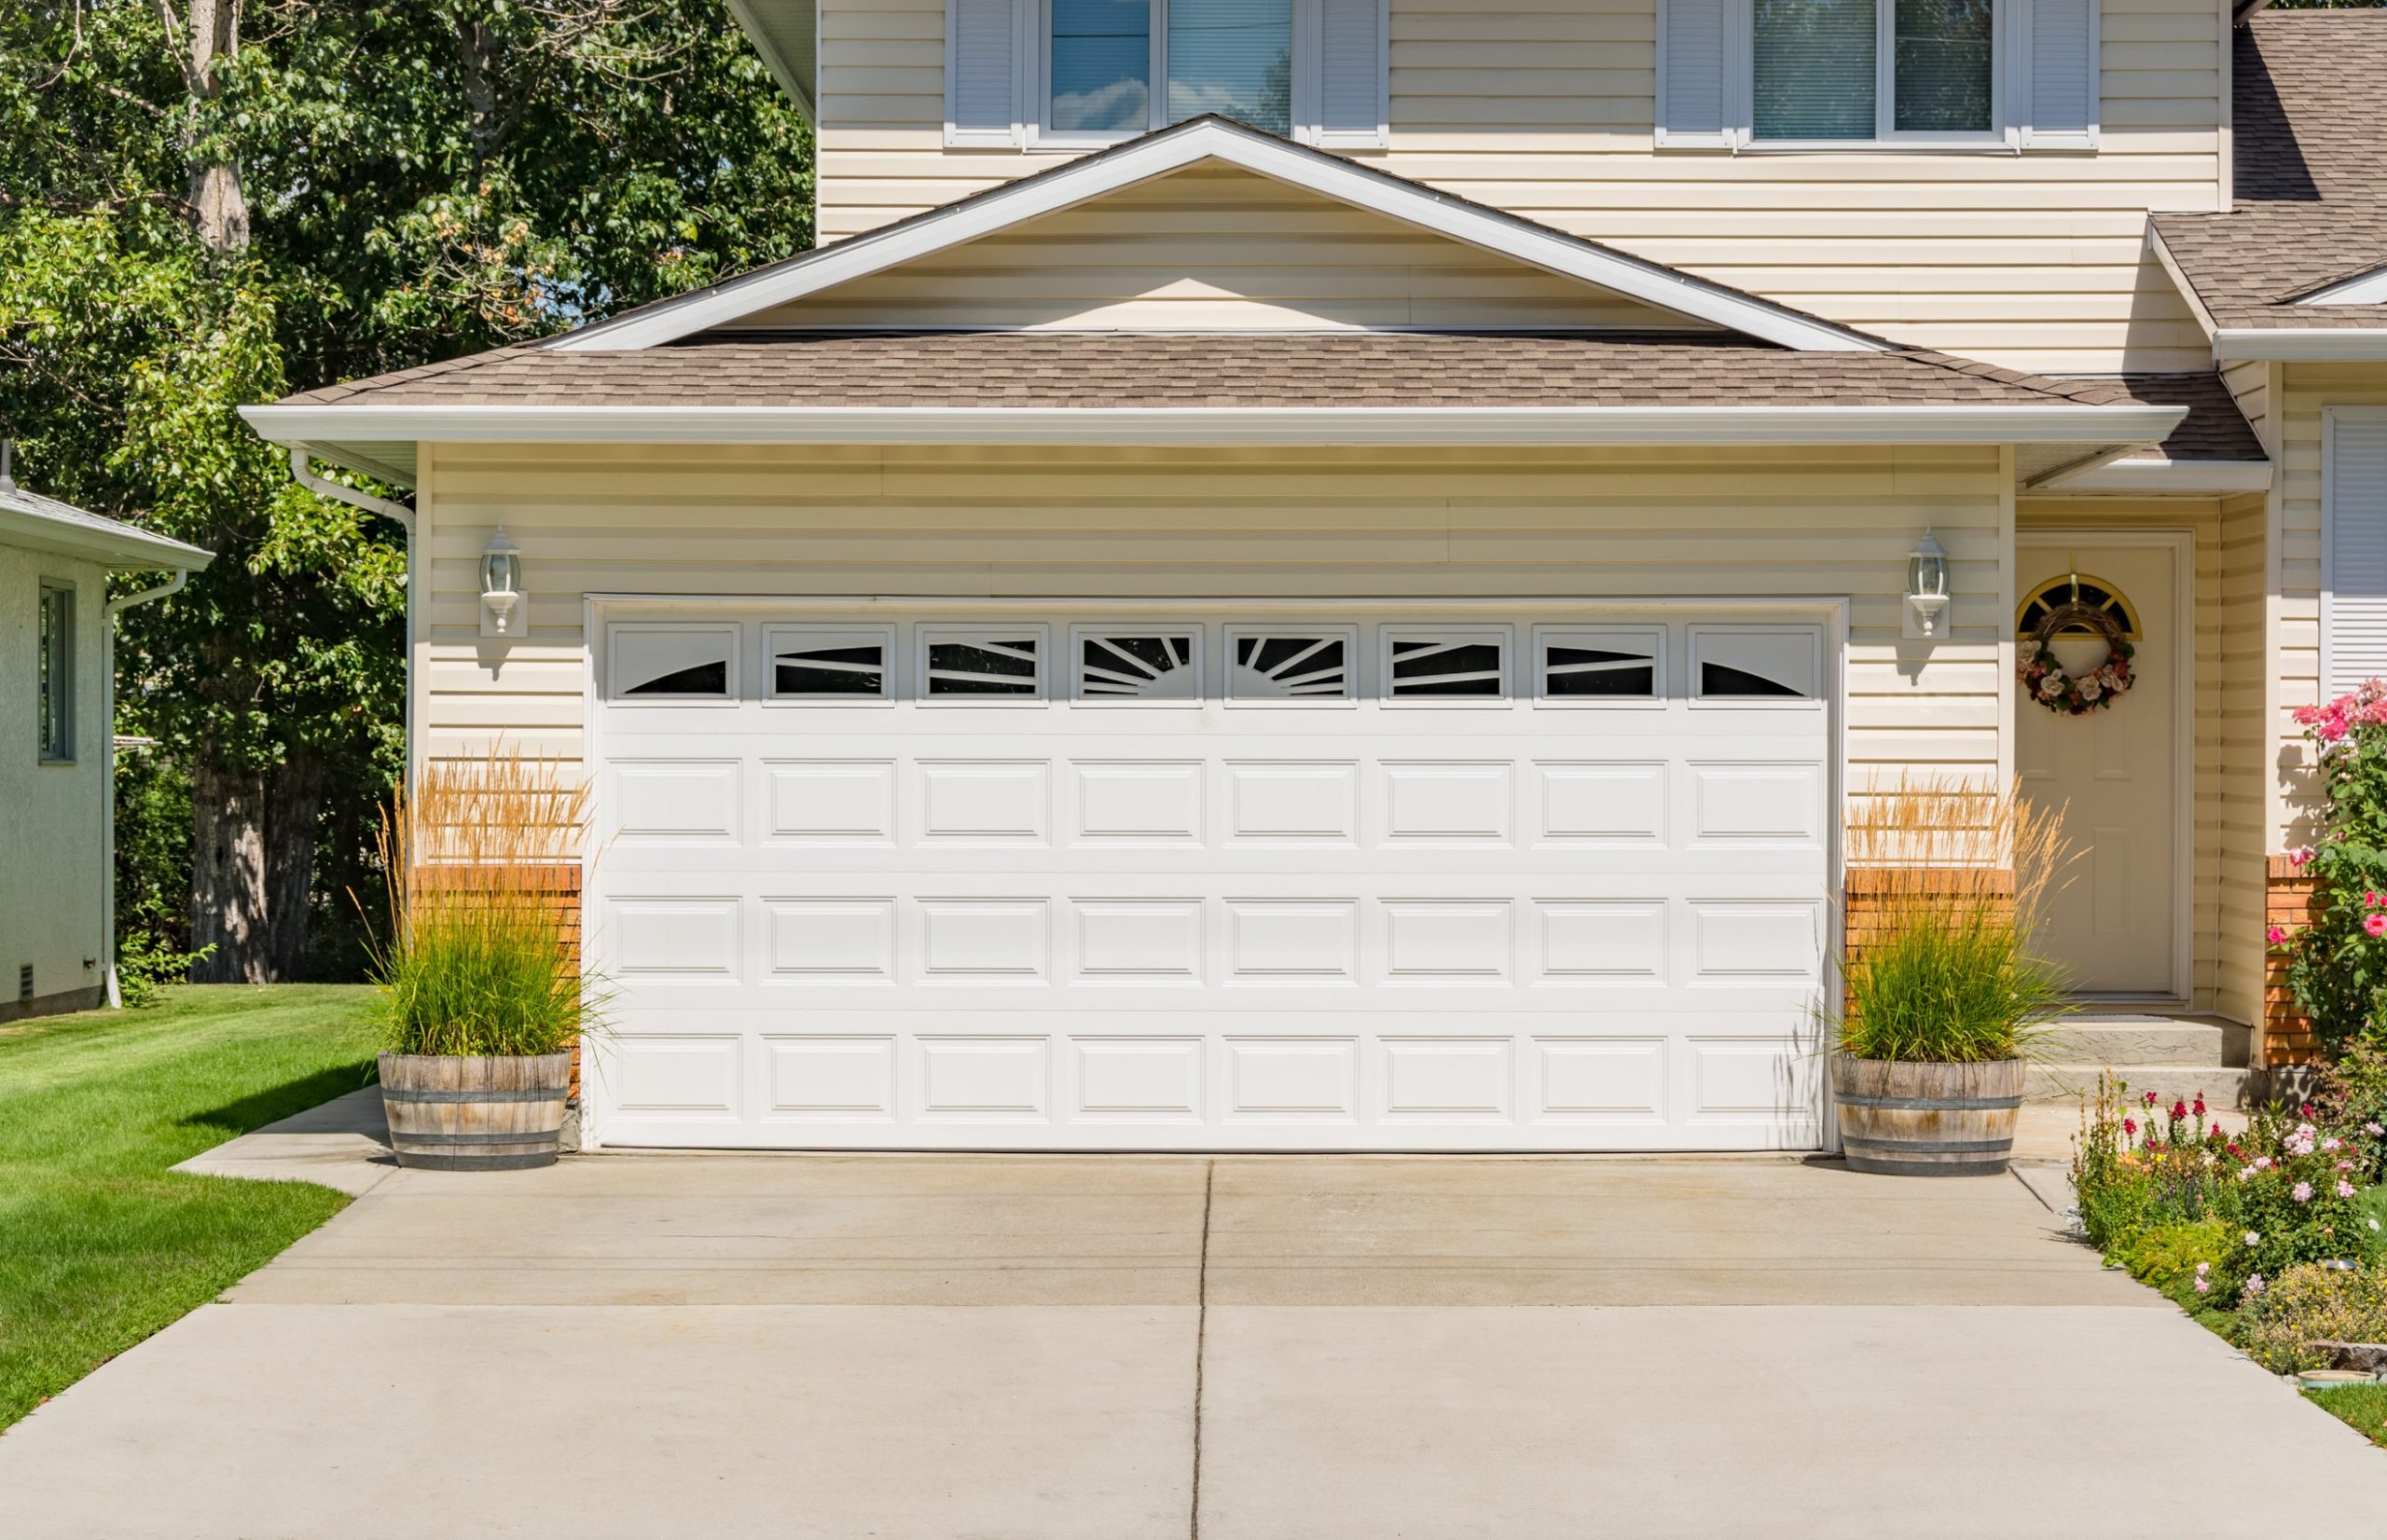 A-TEX Roofing & Remodeling | When Is It Time To Replace a Garage Door?